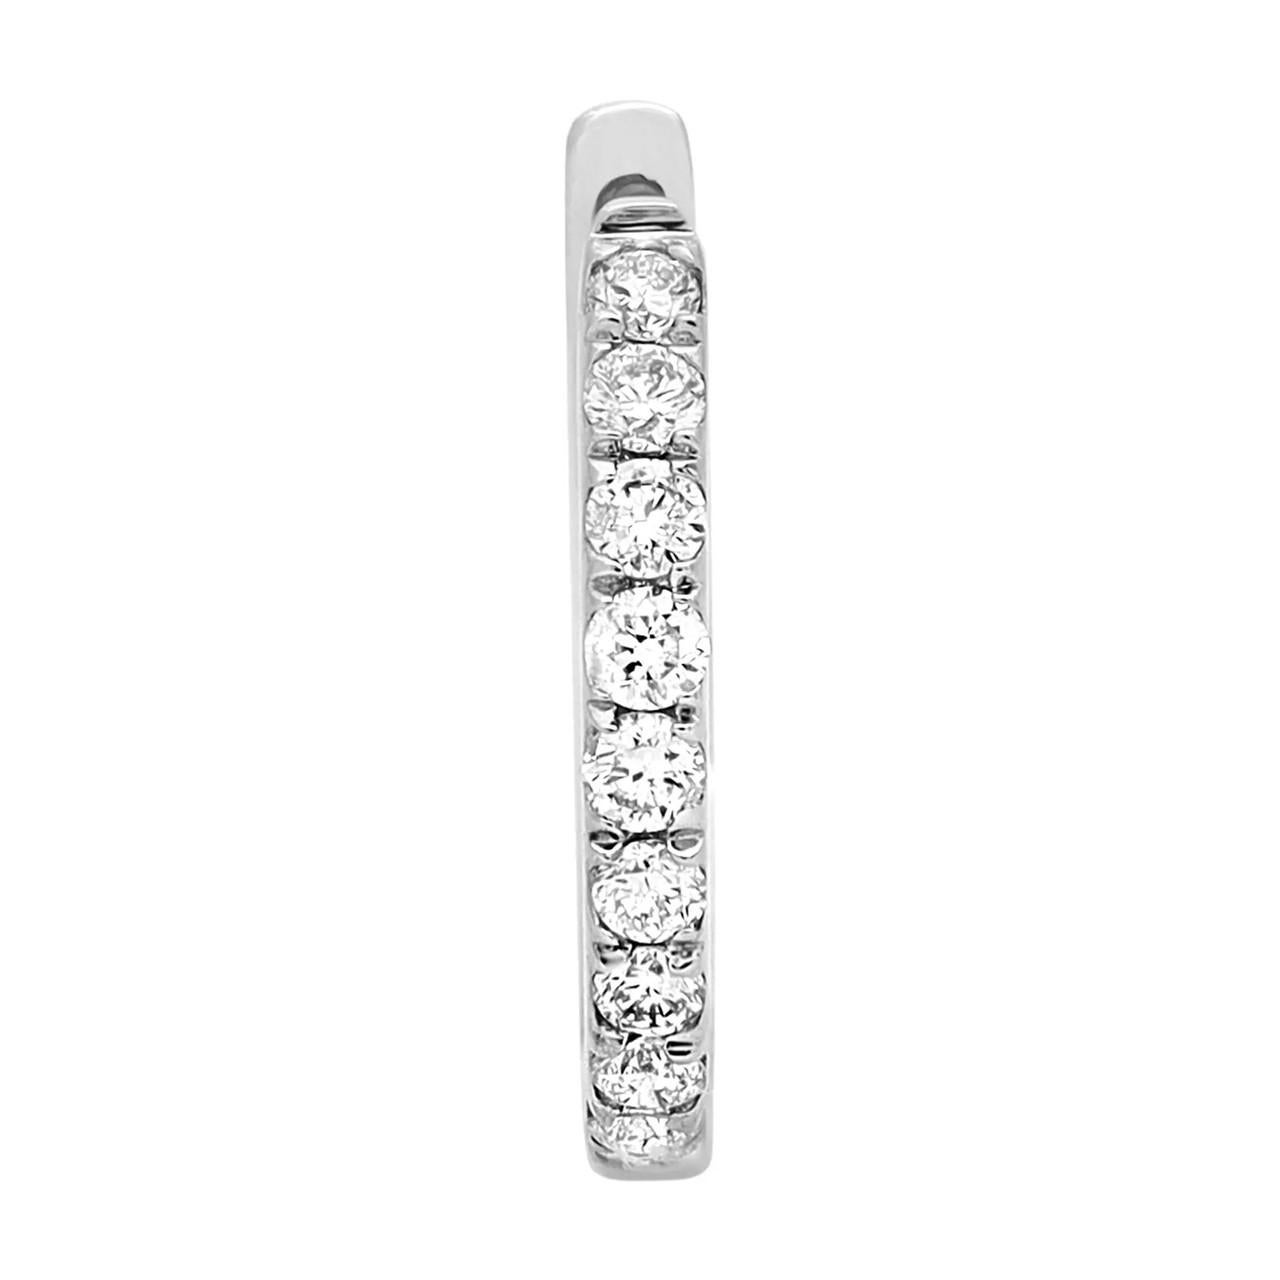 0.20 Carat Round Cut Diamond Huggie Earrings in 14k White Gold In New Condition For Sale In New York, NY